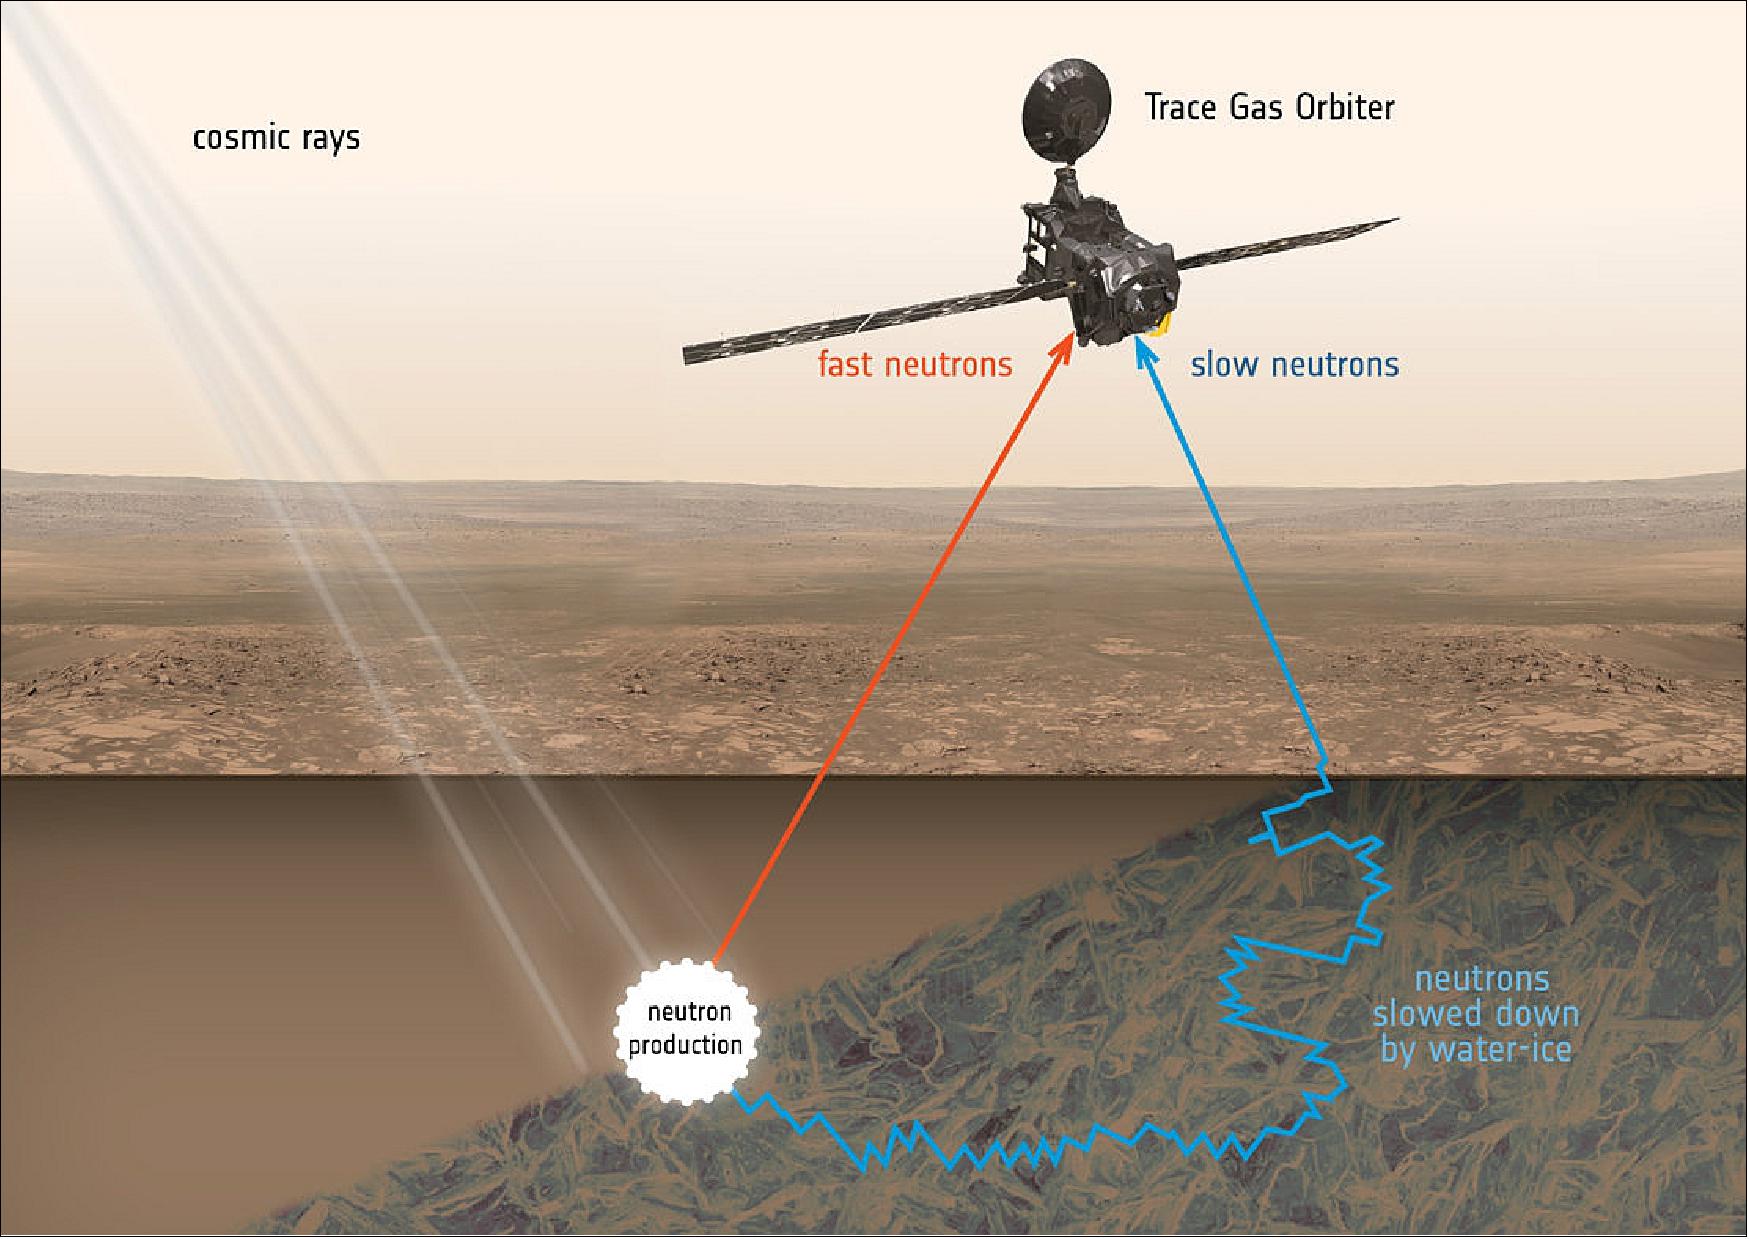 Figure 95: The ExoMars Trace Gas Orbiter will use a neutron detector, namely FREND (Fine Resolution Epithermal Neutron Detector), to map subsurface hydrogen to a depth of 1 m to reveal deposits of water-ice hidden just below the surface (image credit: ESA/ATG medialab)